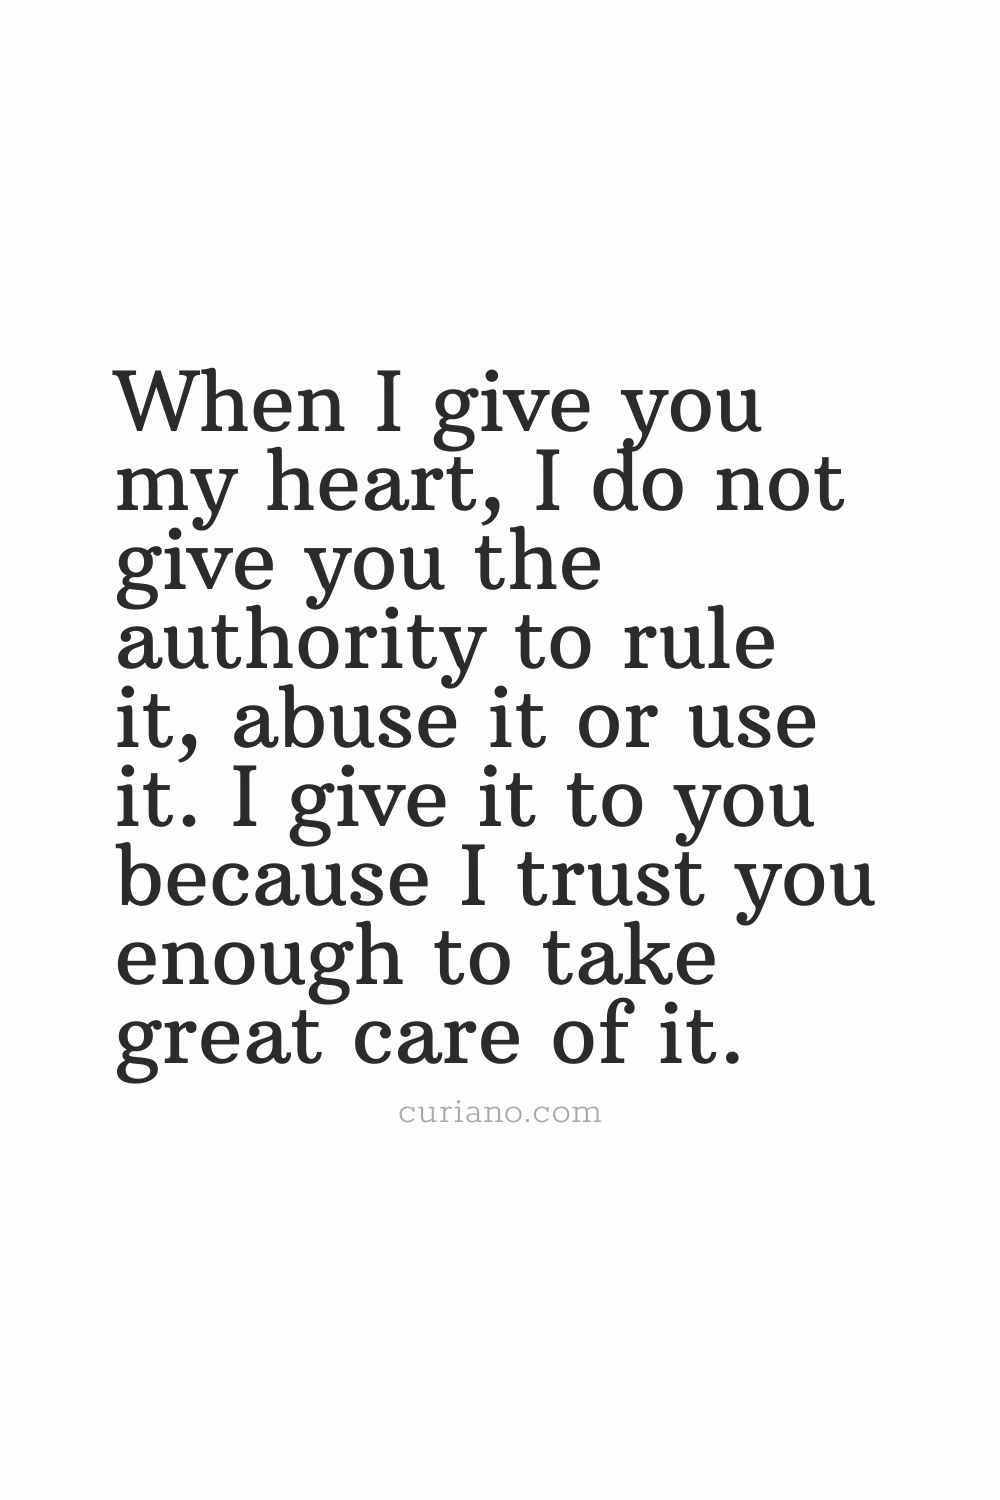 When I give you my heart, I do not give you the authority to rule it, abuse it or use it. I give it to you because I trust you enough to take great care of it